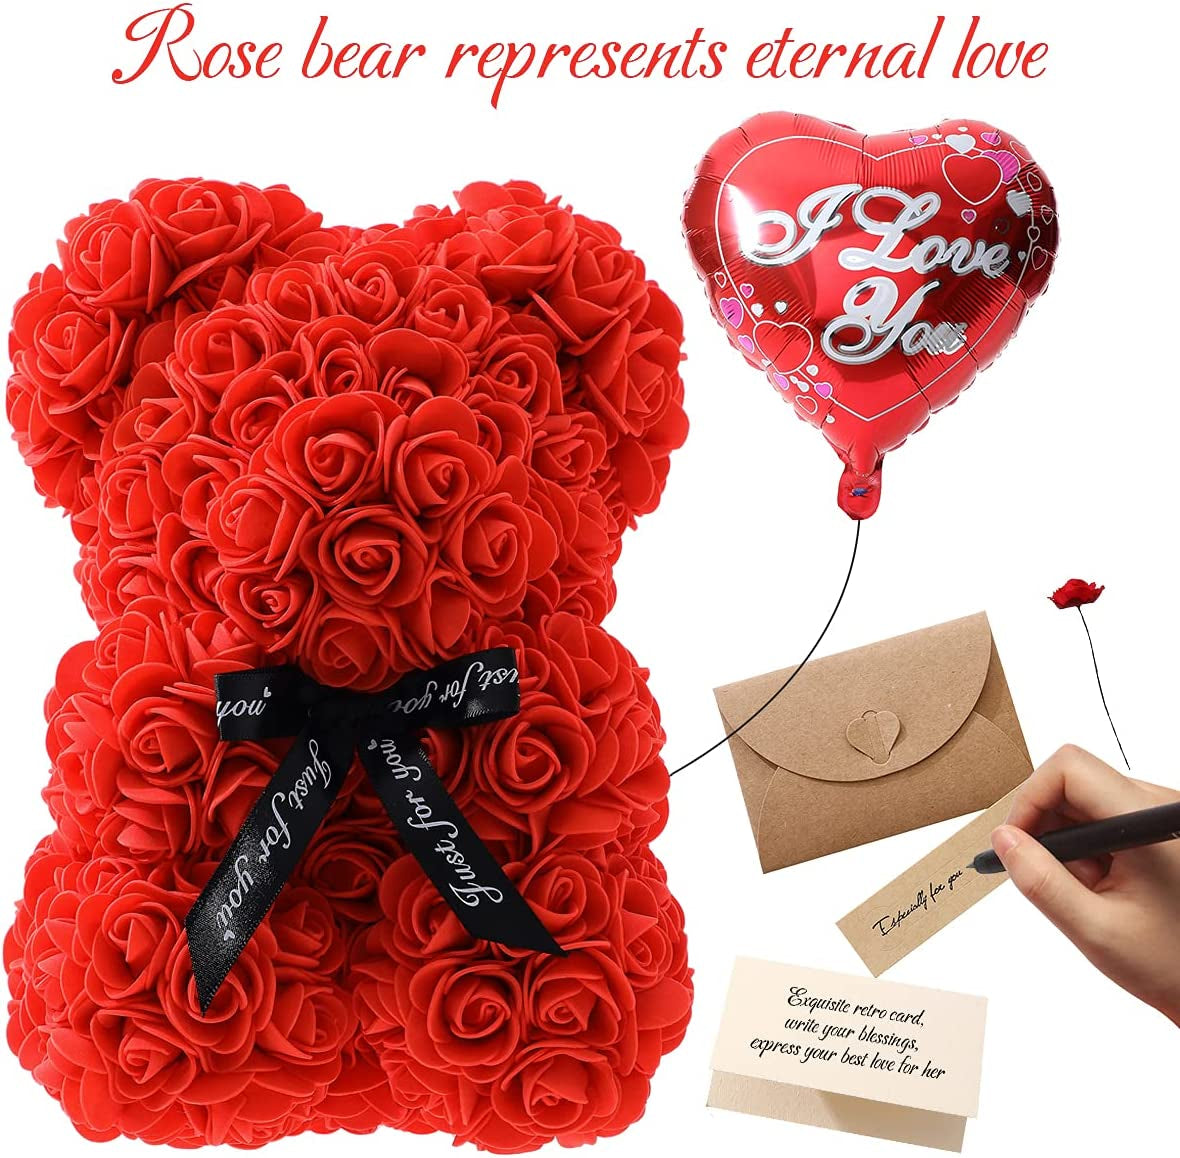 Gifts for Women - Rose Flower Bear - Rose Bear,Pure Handmade Rose Teddy Bear,Gift for Mothers Day,Valentines Day, Anniversary and Bridal Showers,W/Clear Gift Box and Greeting Card (Red)